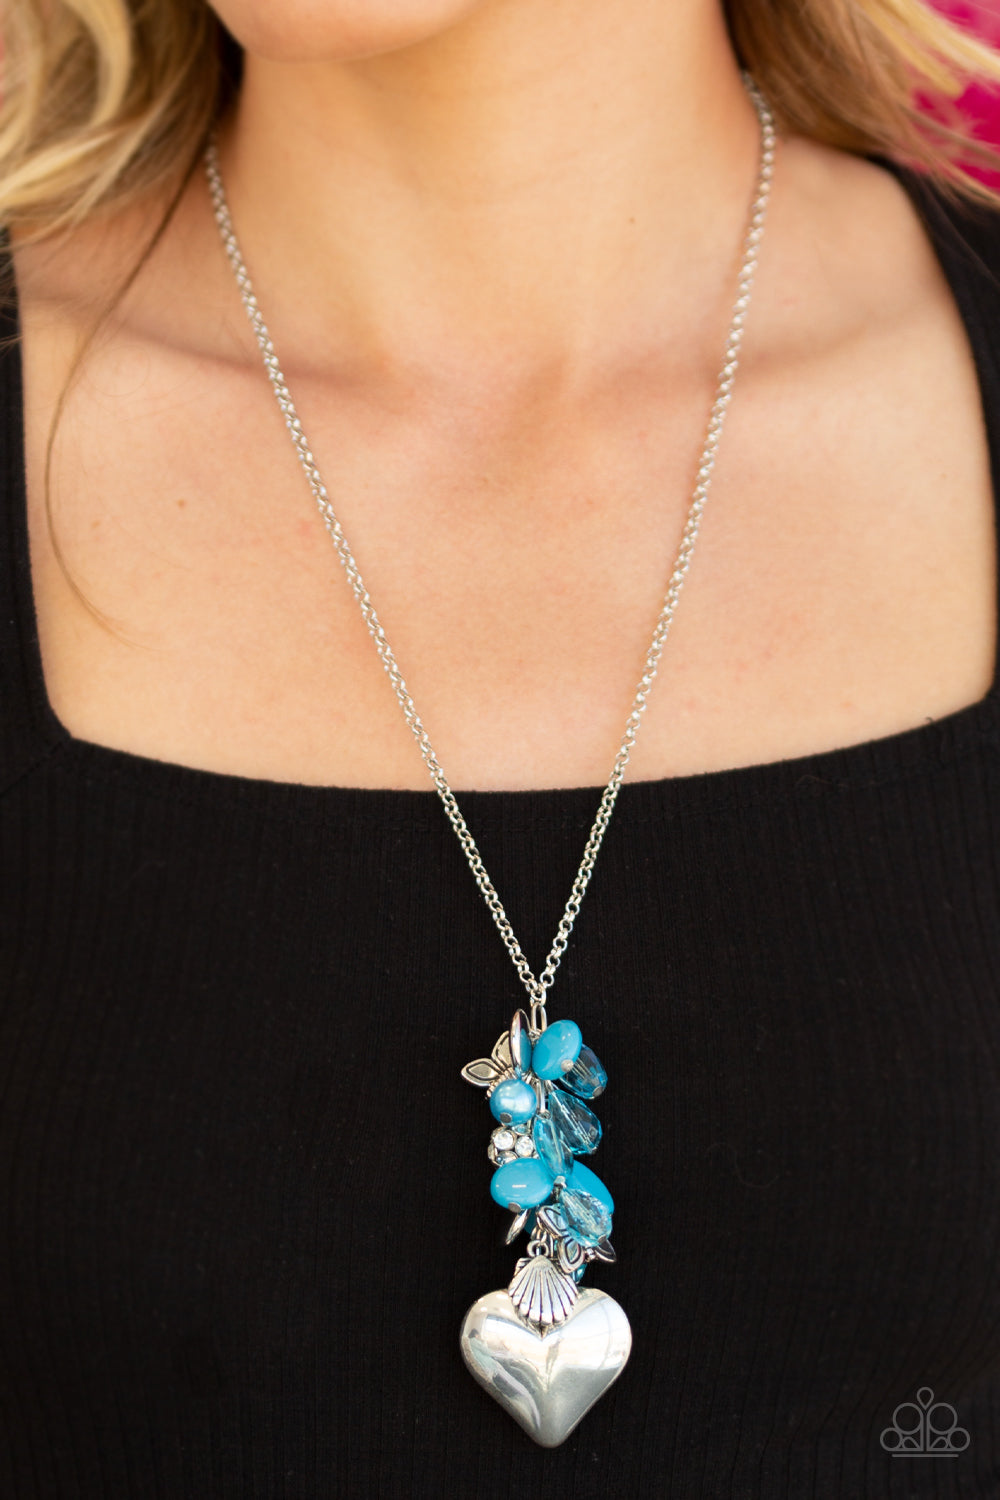 Paparazzi Necklace ~ Beach Buzz - Blue Butterfly and Heart Charm Necklace